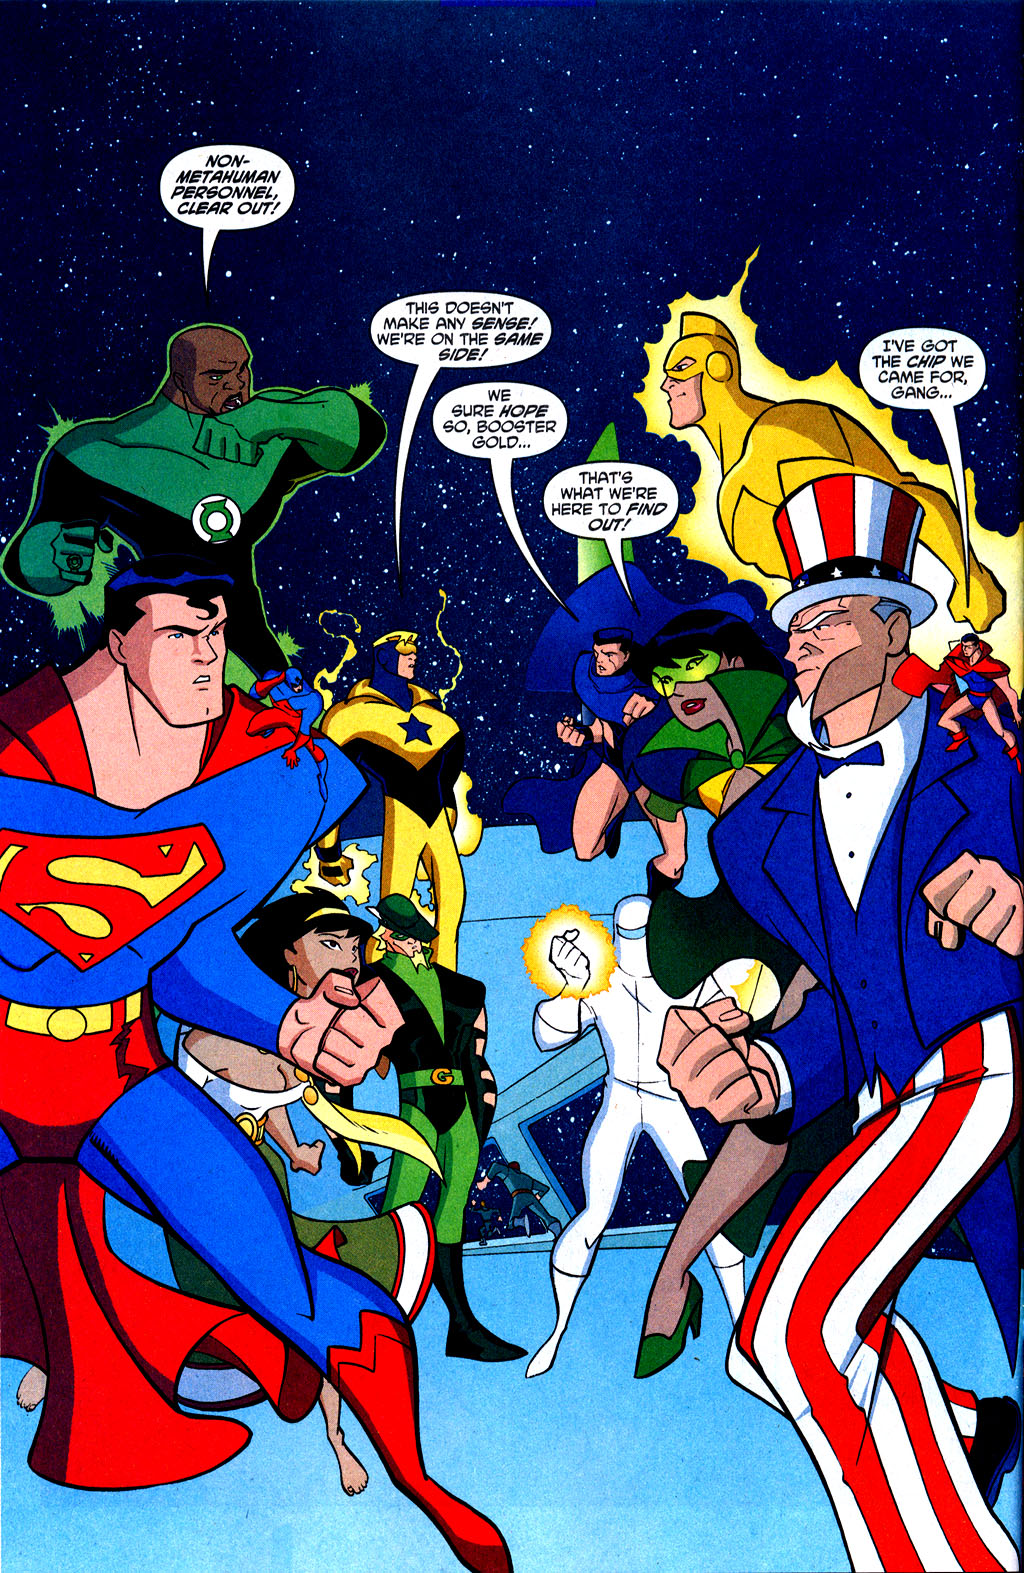 Justice League Unlimited Issue 17 Read Justice League Unlimited Issue 17 Comic Online In High 